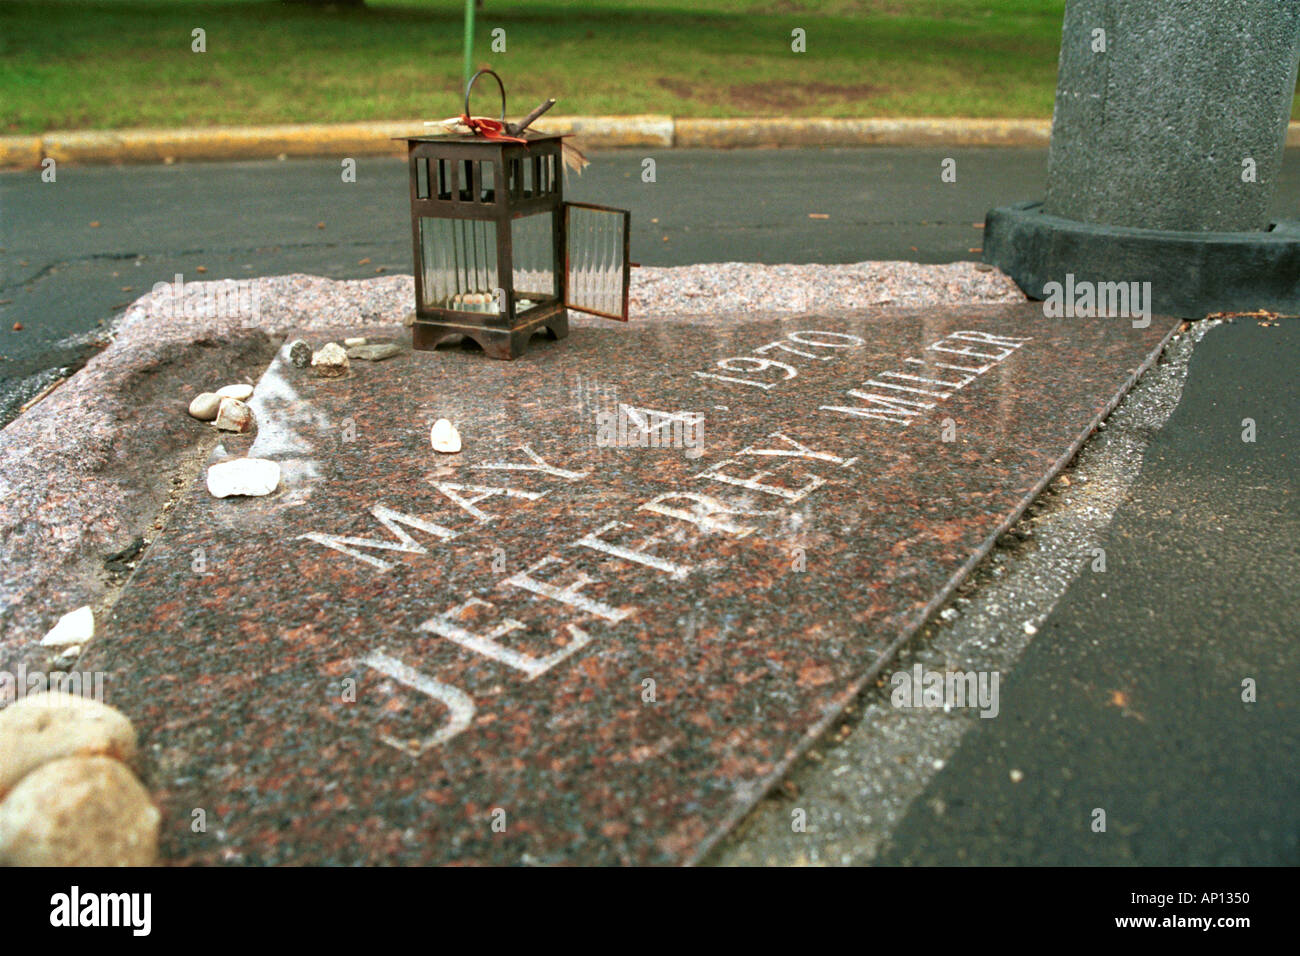 Memorial of student killed during Vietnam protests Kent State University Ohio 1970 Stock Photo